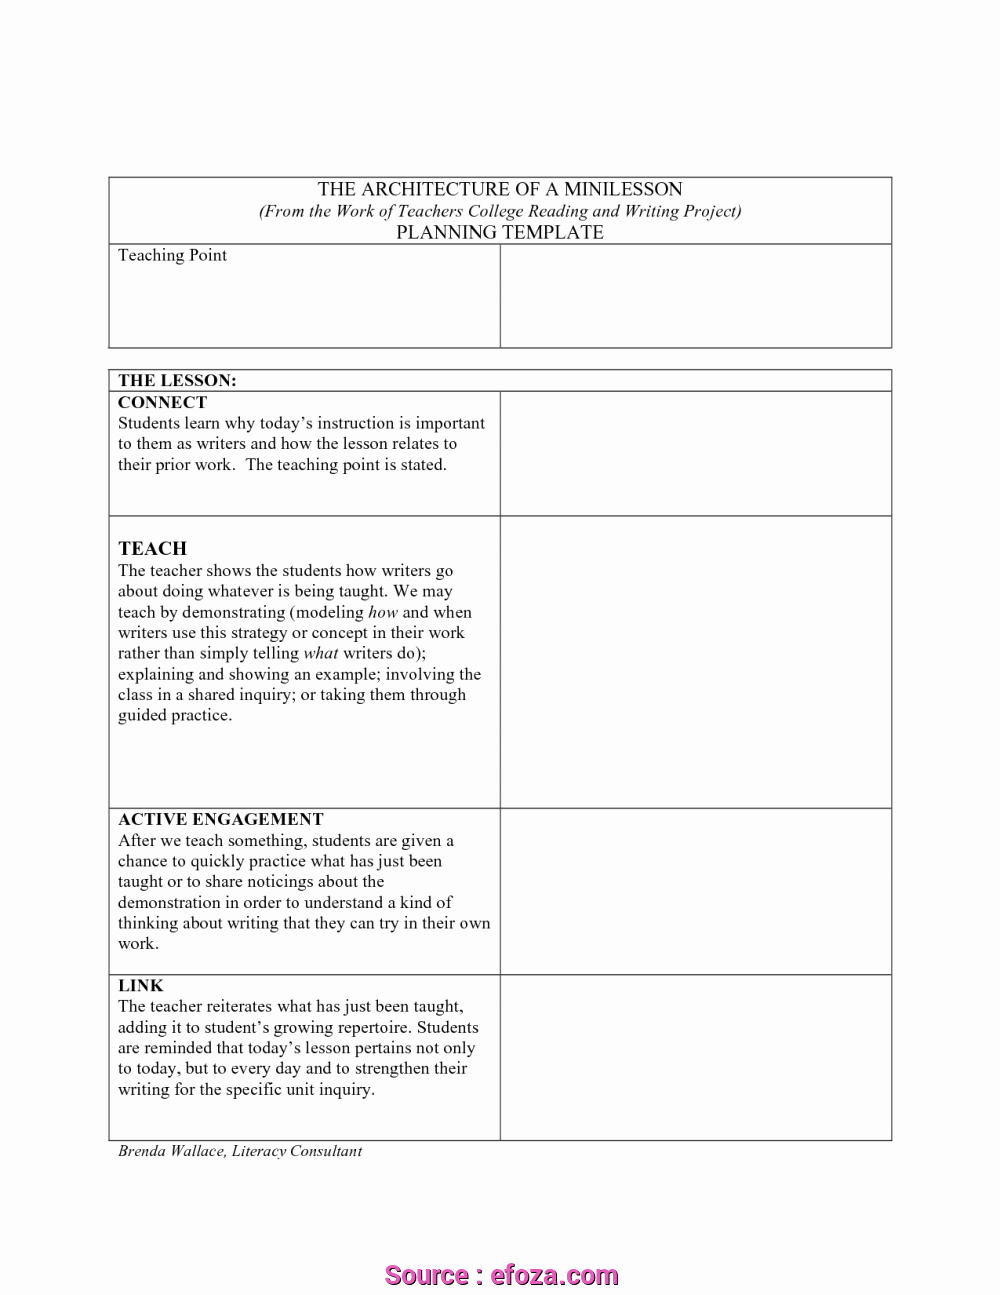 Workshop Lesson Plan Template New 6 Practical Reading Writing Workshop Lesson Plan Template